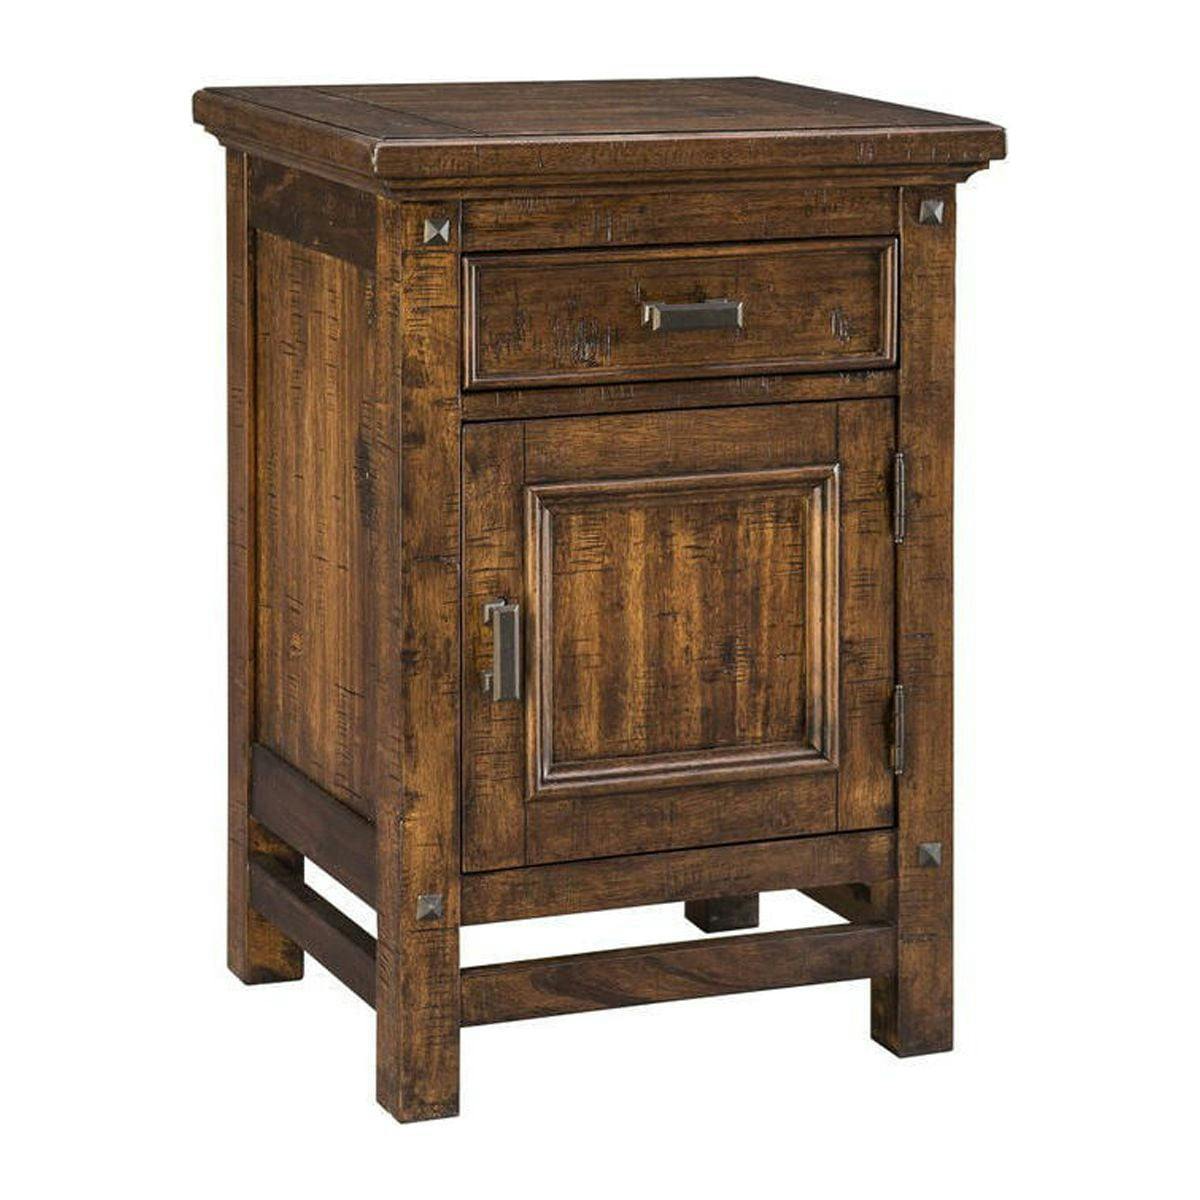 Vintage Acacia Rustic Nightstand with Drawer and Cabinet